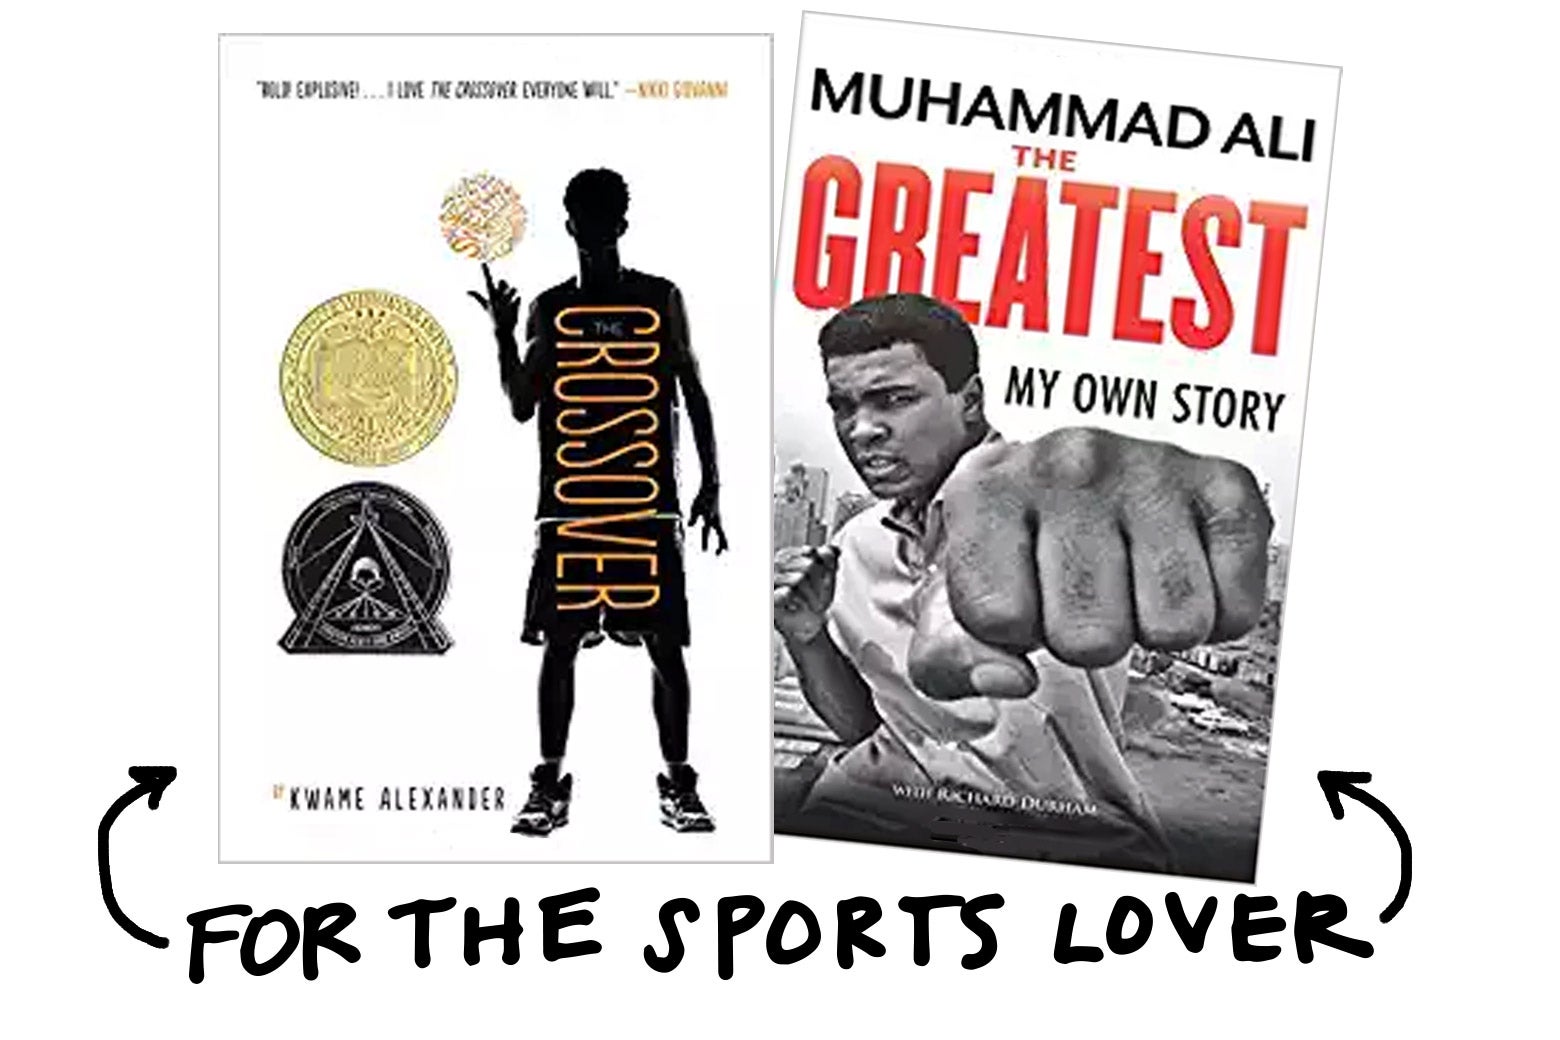 For the sports lover, try The Greatest: My Own Story by Muhammad Ali.